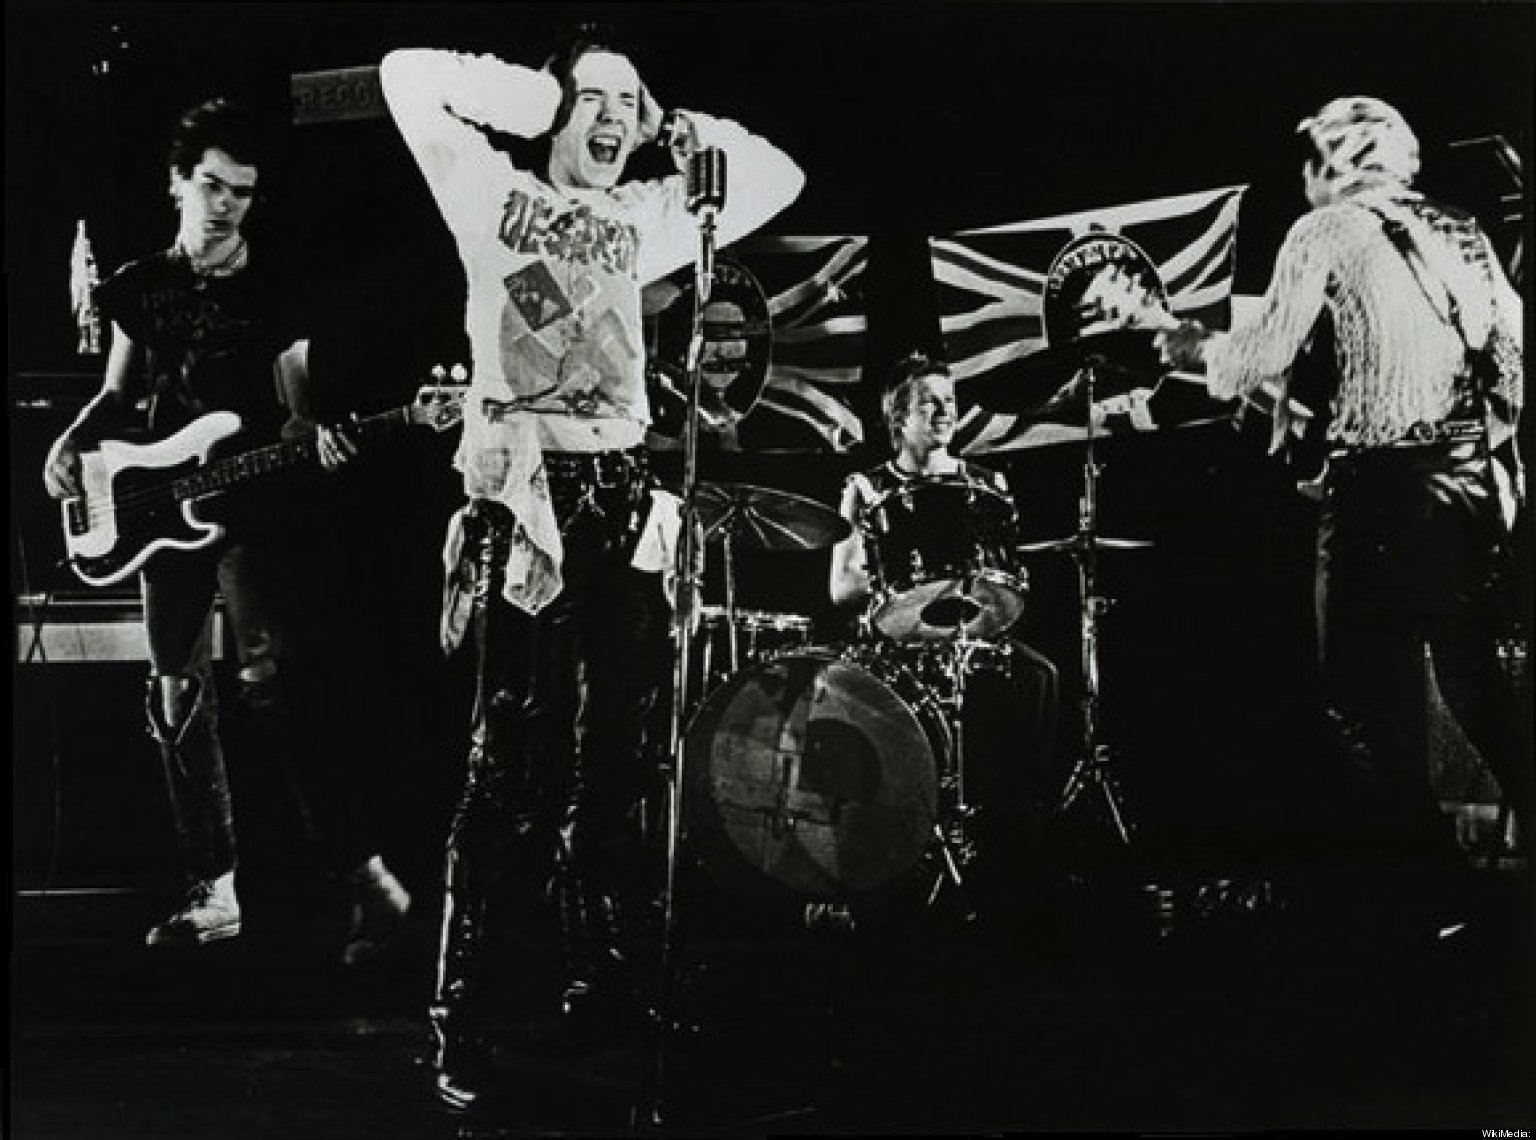 Sex Pistols Long Lost Belsen Was A Gas Demo Surfaces On The Internet